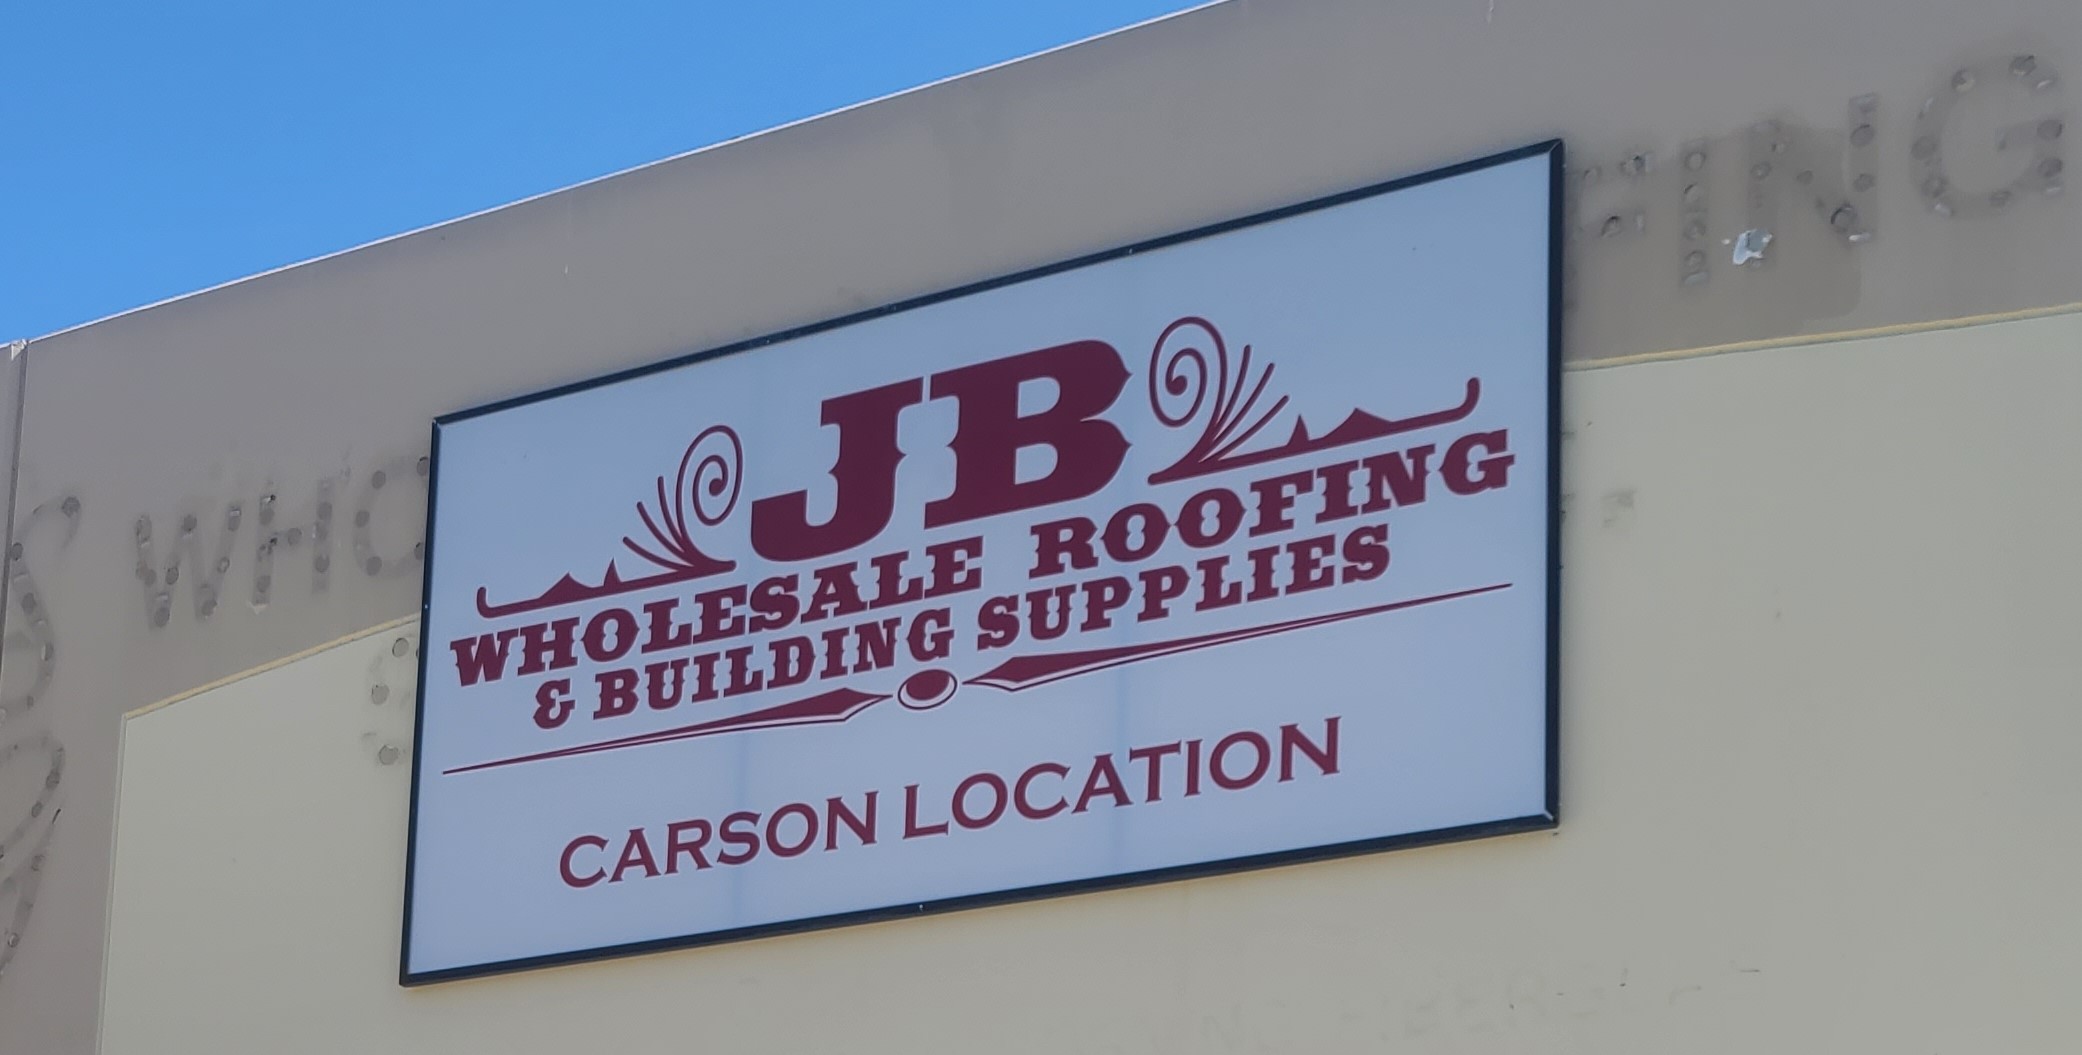 Our sign package for JB Wholesale Roofing & Building Supplies spans multiple locations and sign types. This one is for their Carson branch. It includes lexan with print building signs as well as maxmetal information and directional signs.